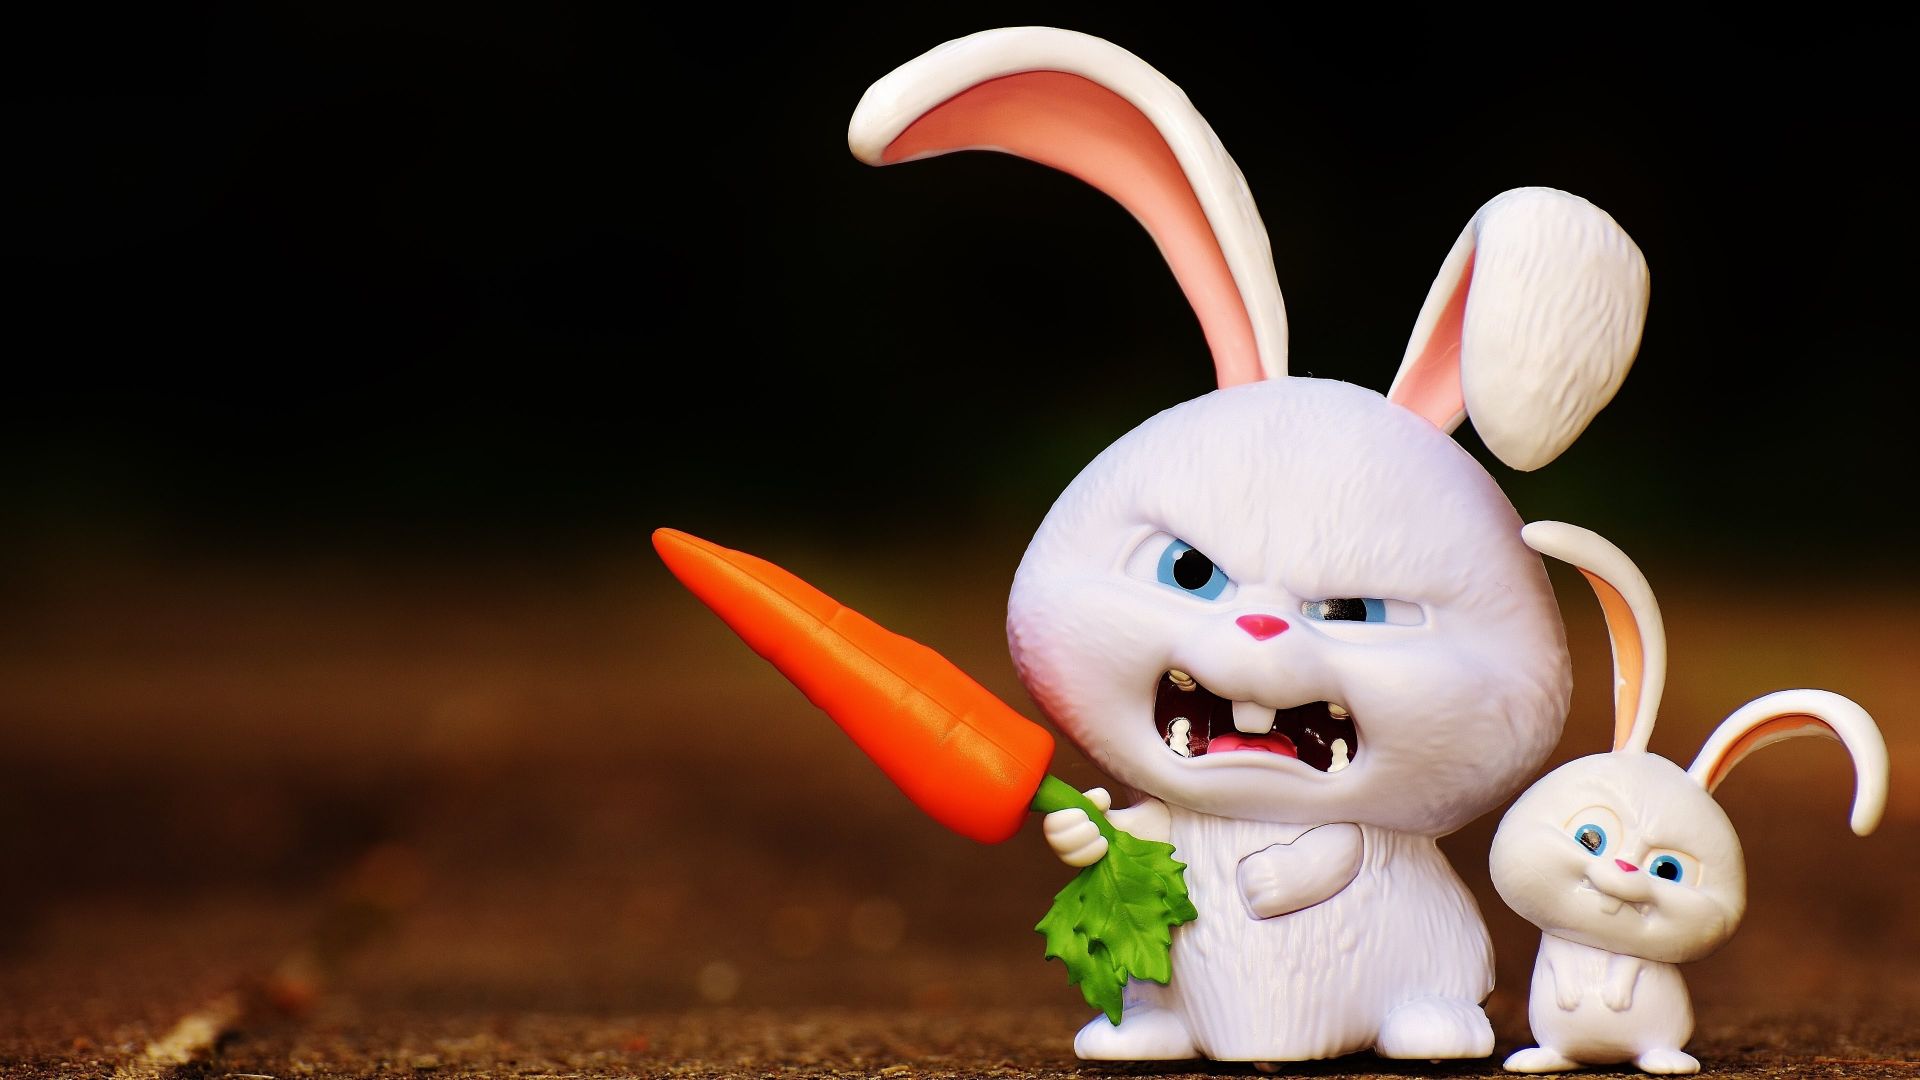 Desktop Wallpaper Funny Bunny With Carrot, Hd Image, Picture, Background,  0xo Jx